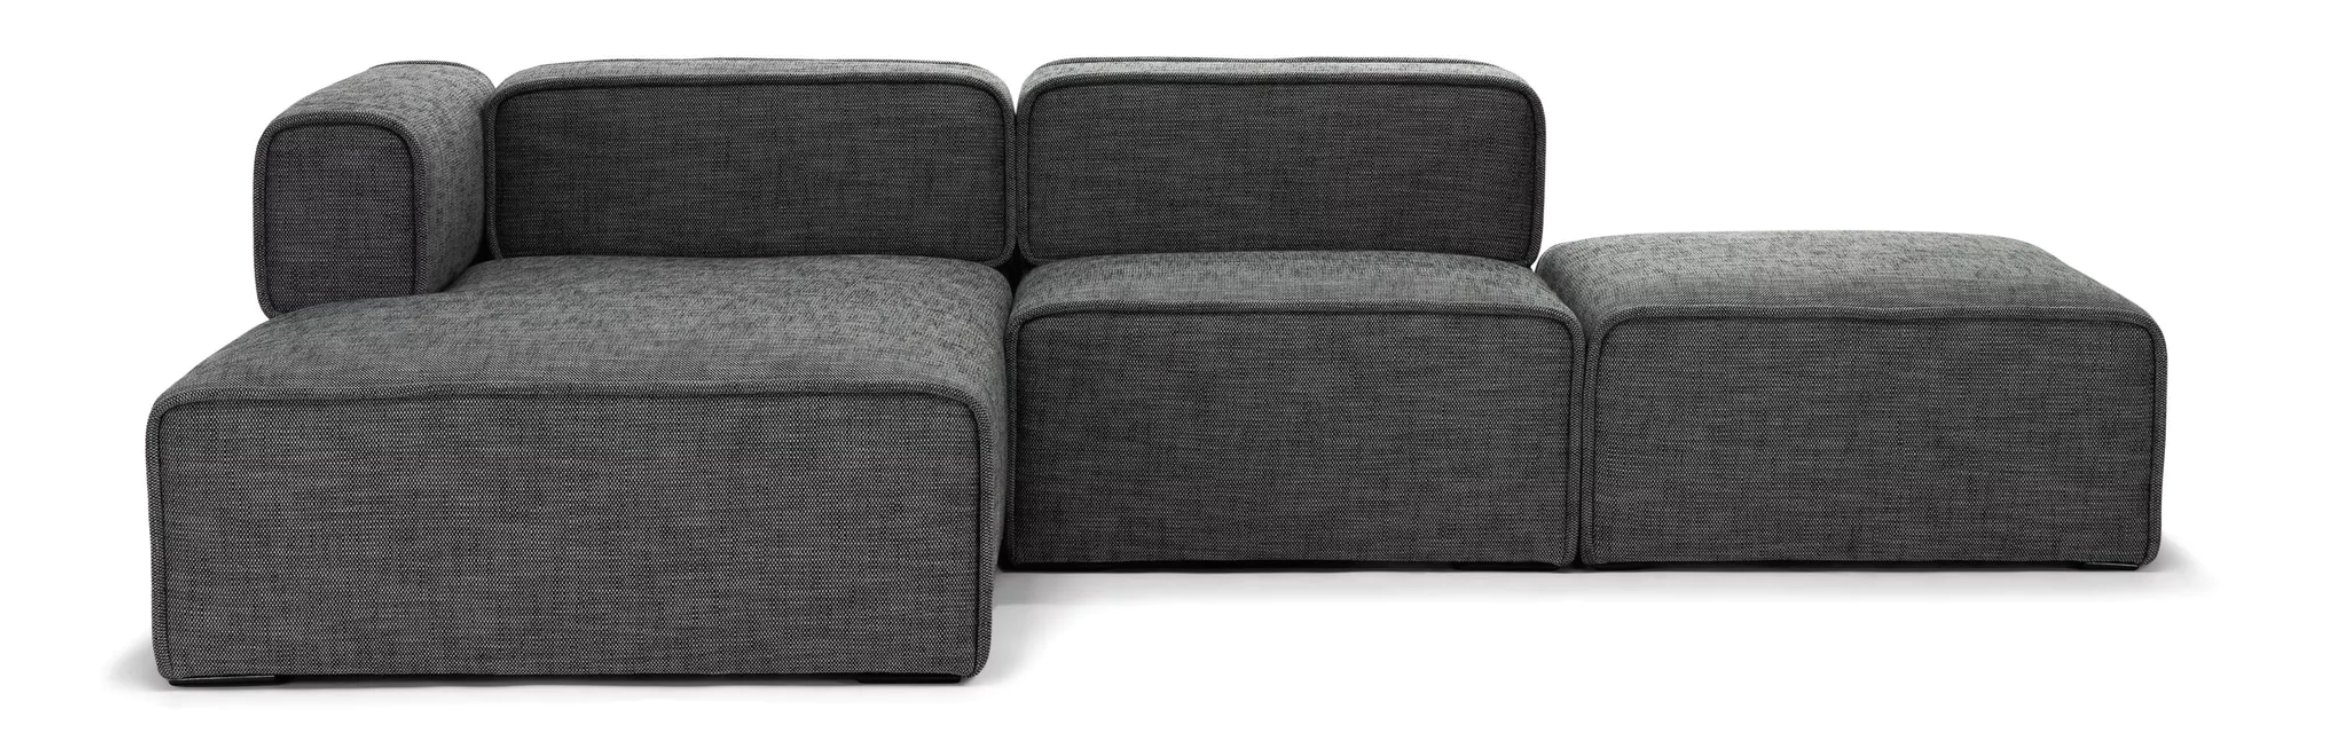 Quadra Left Sectional in Carbon Gray - Image 0